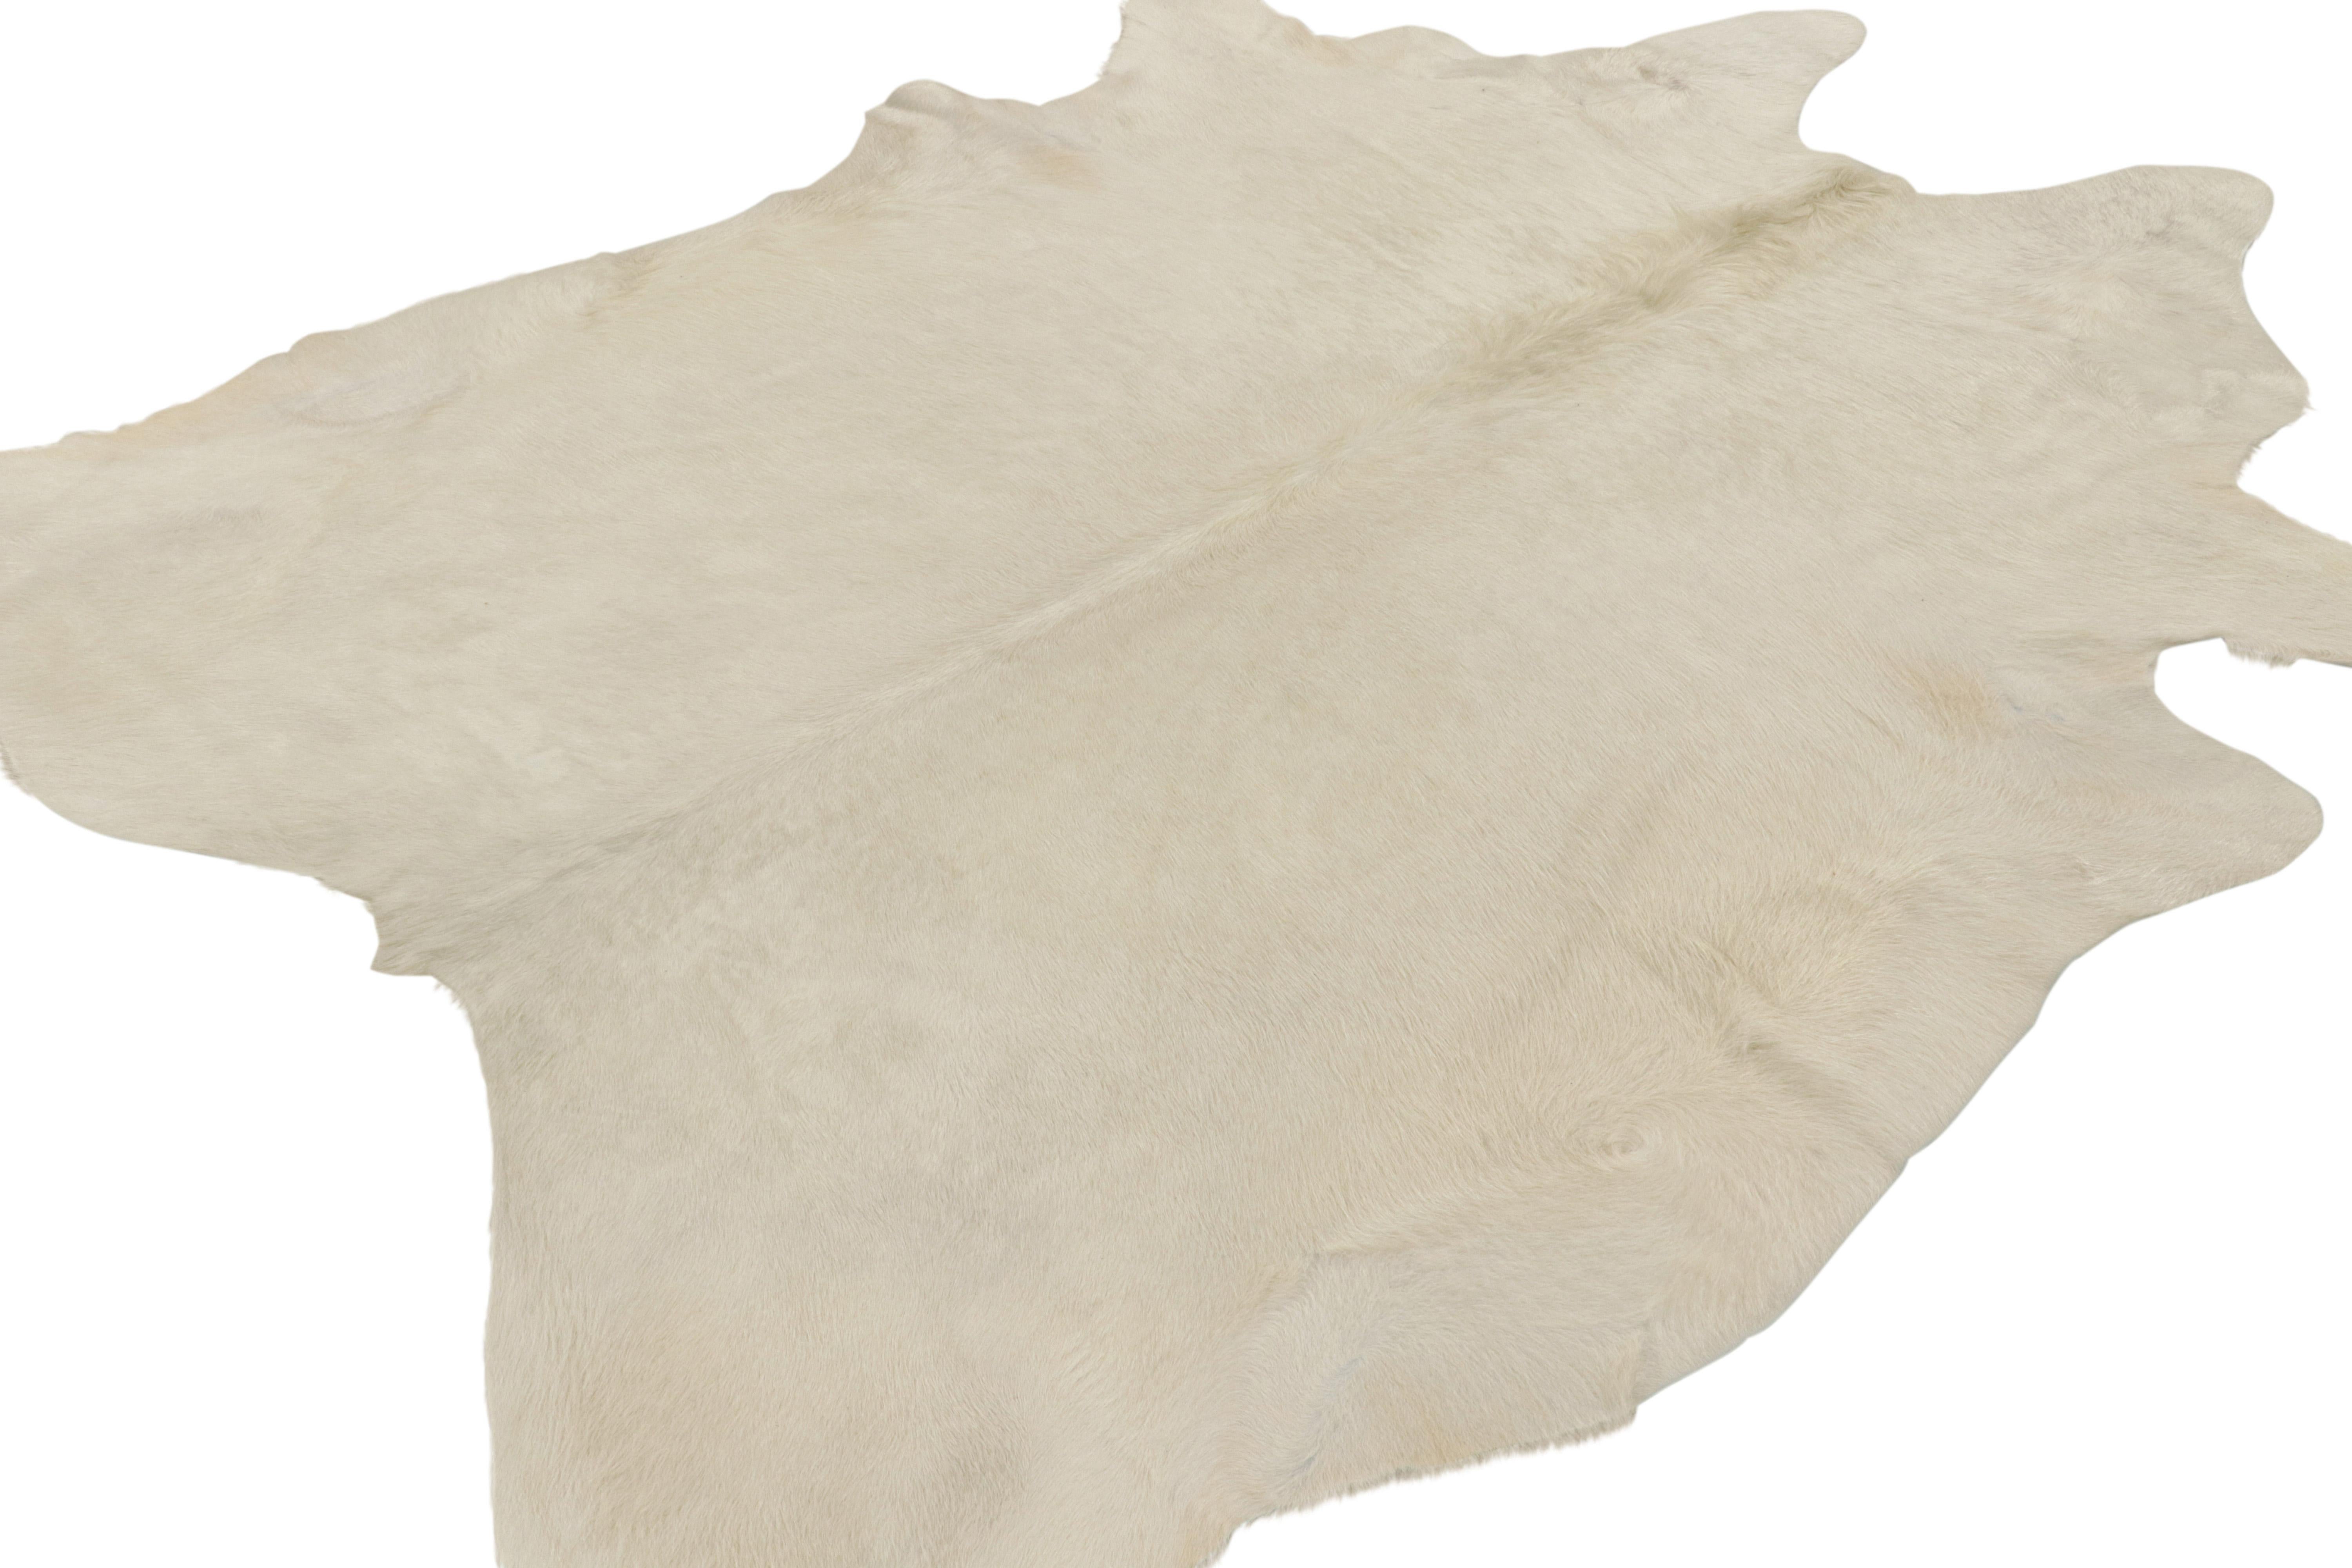 This 7x7 contemporary cowhide rug, originating from Brazil, is a comfortable and stylish addition to a wide range of spaces for its unique shape inherent to the craft. 

On the Design: 

Admirers of the craft may appreciate this new cowhide rug made